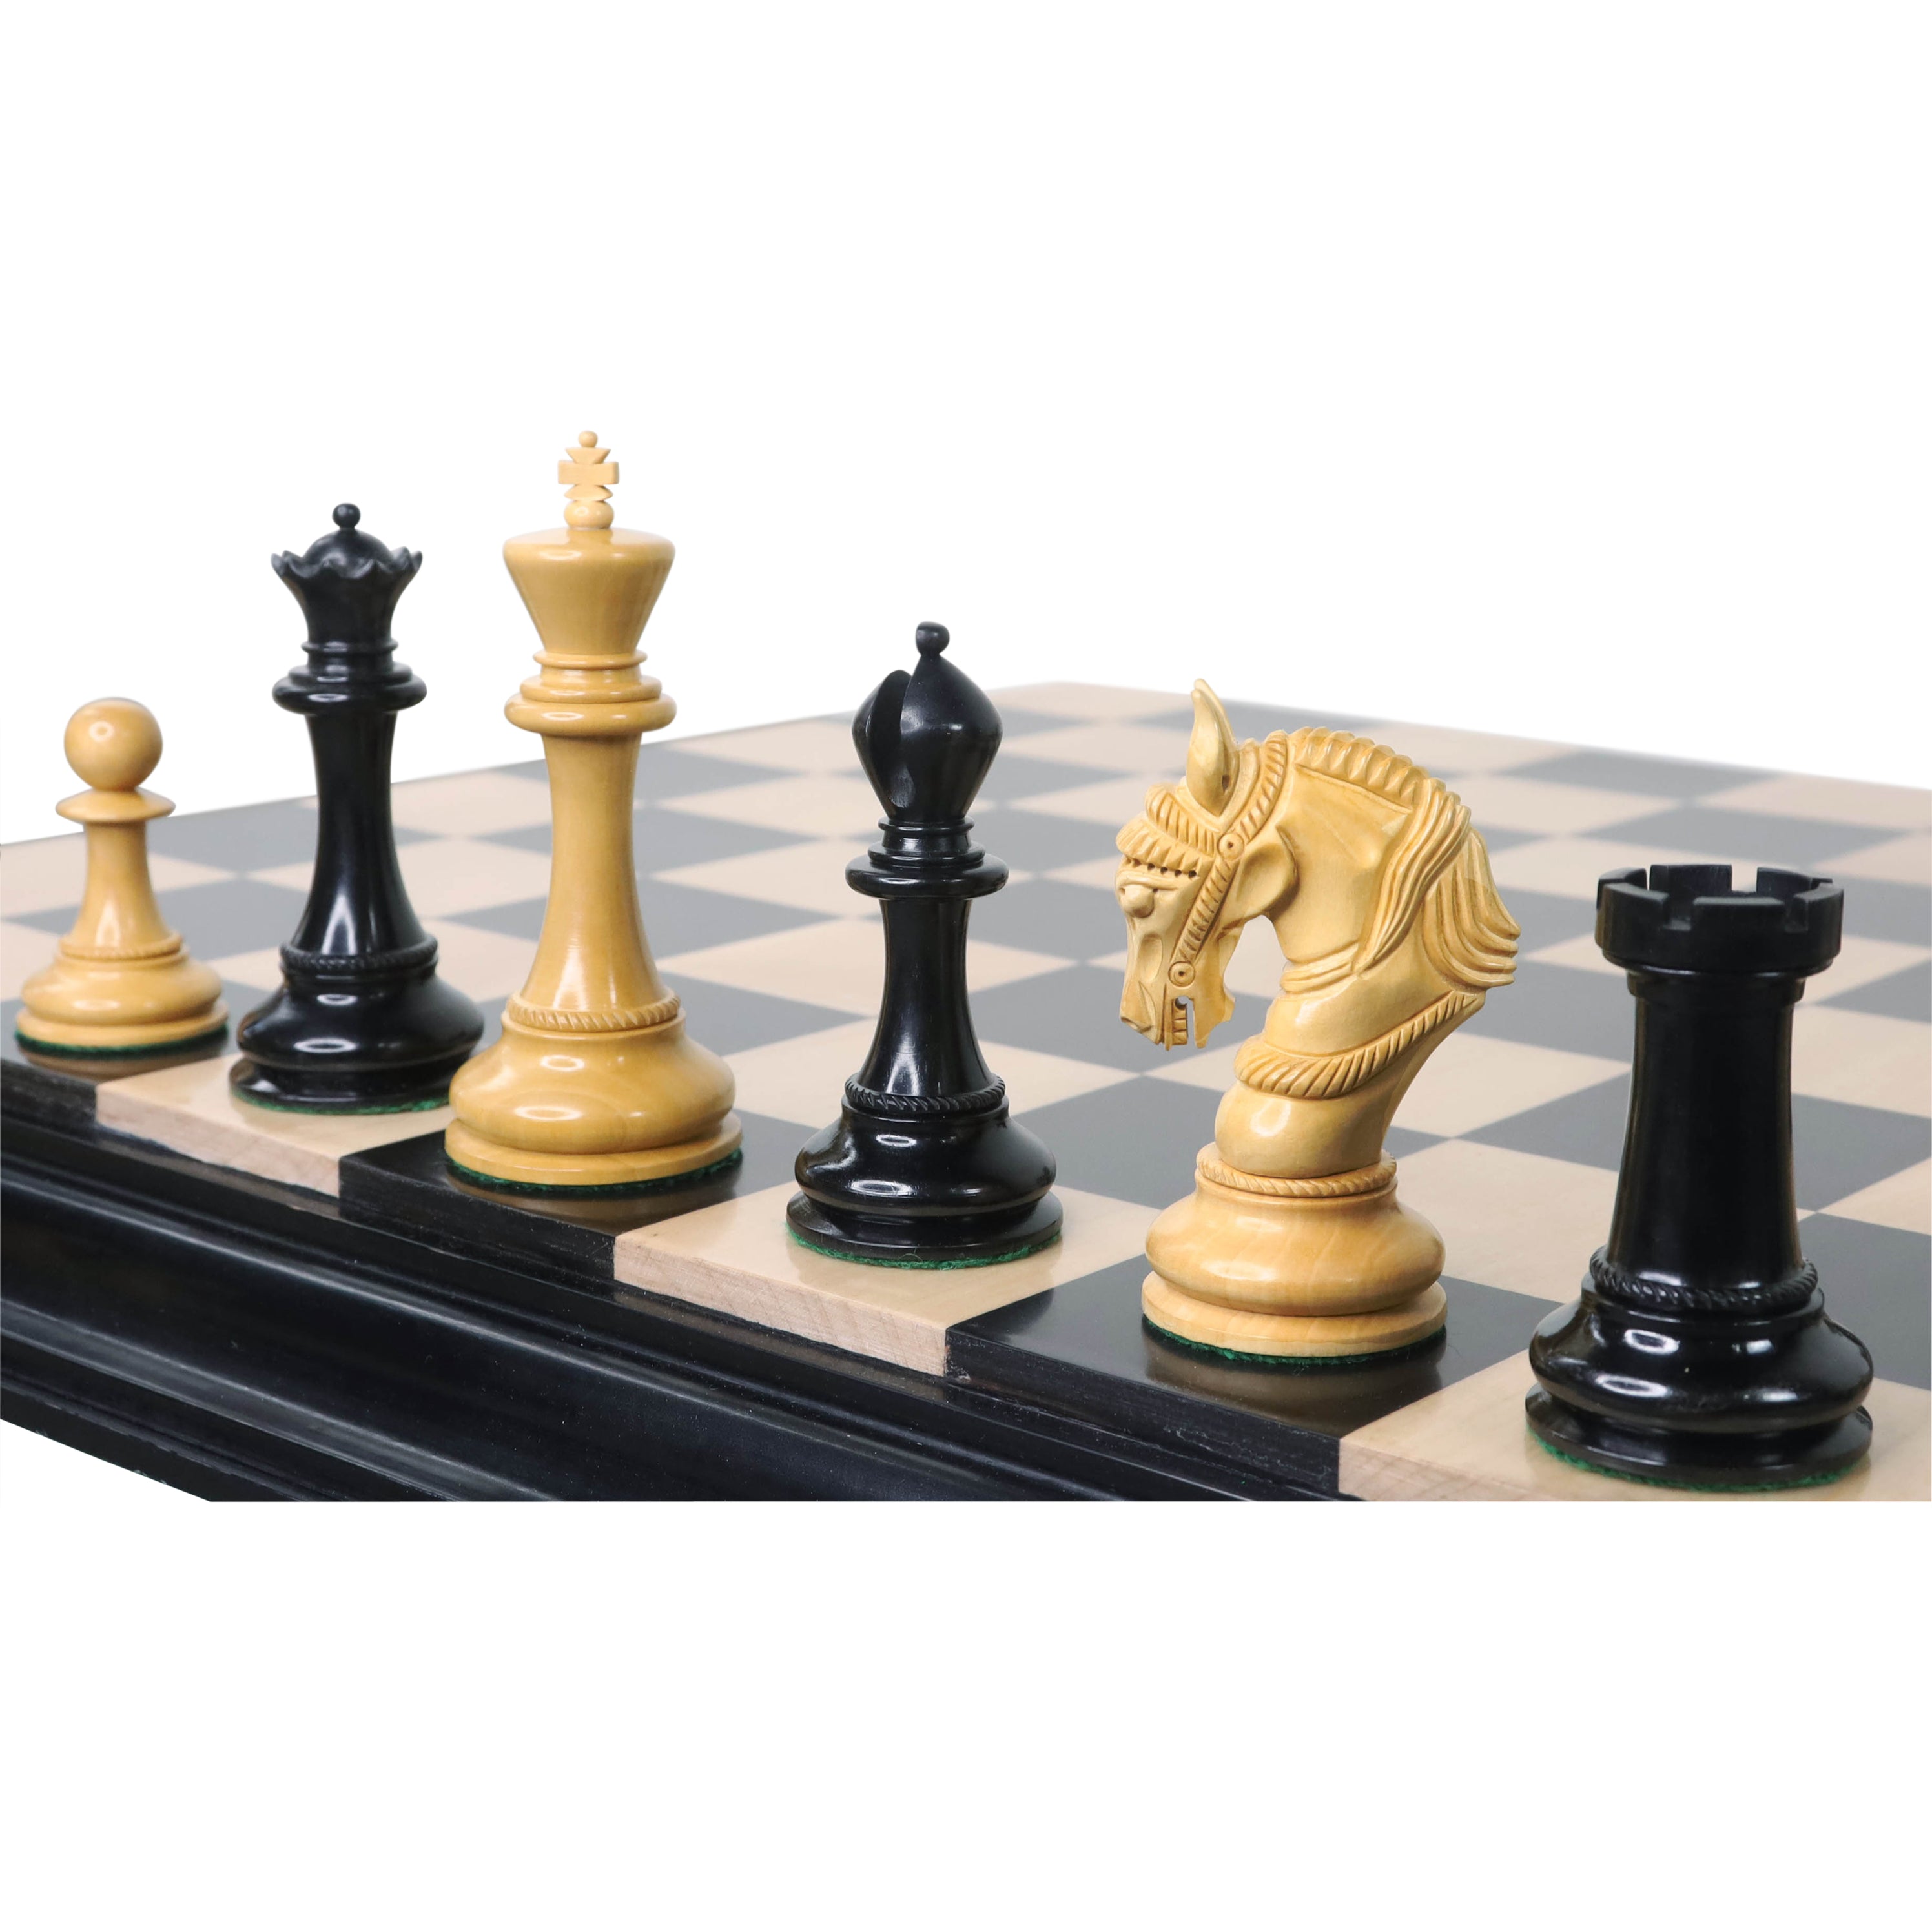 4.5" Imperator Luxury Staunton Chess Pieces Only Set - Ebony Wood - Triple Weight